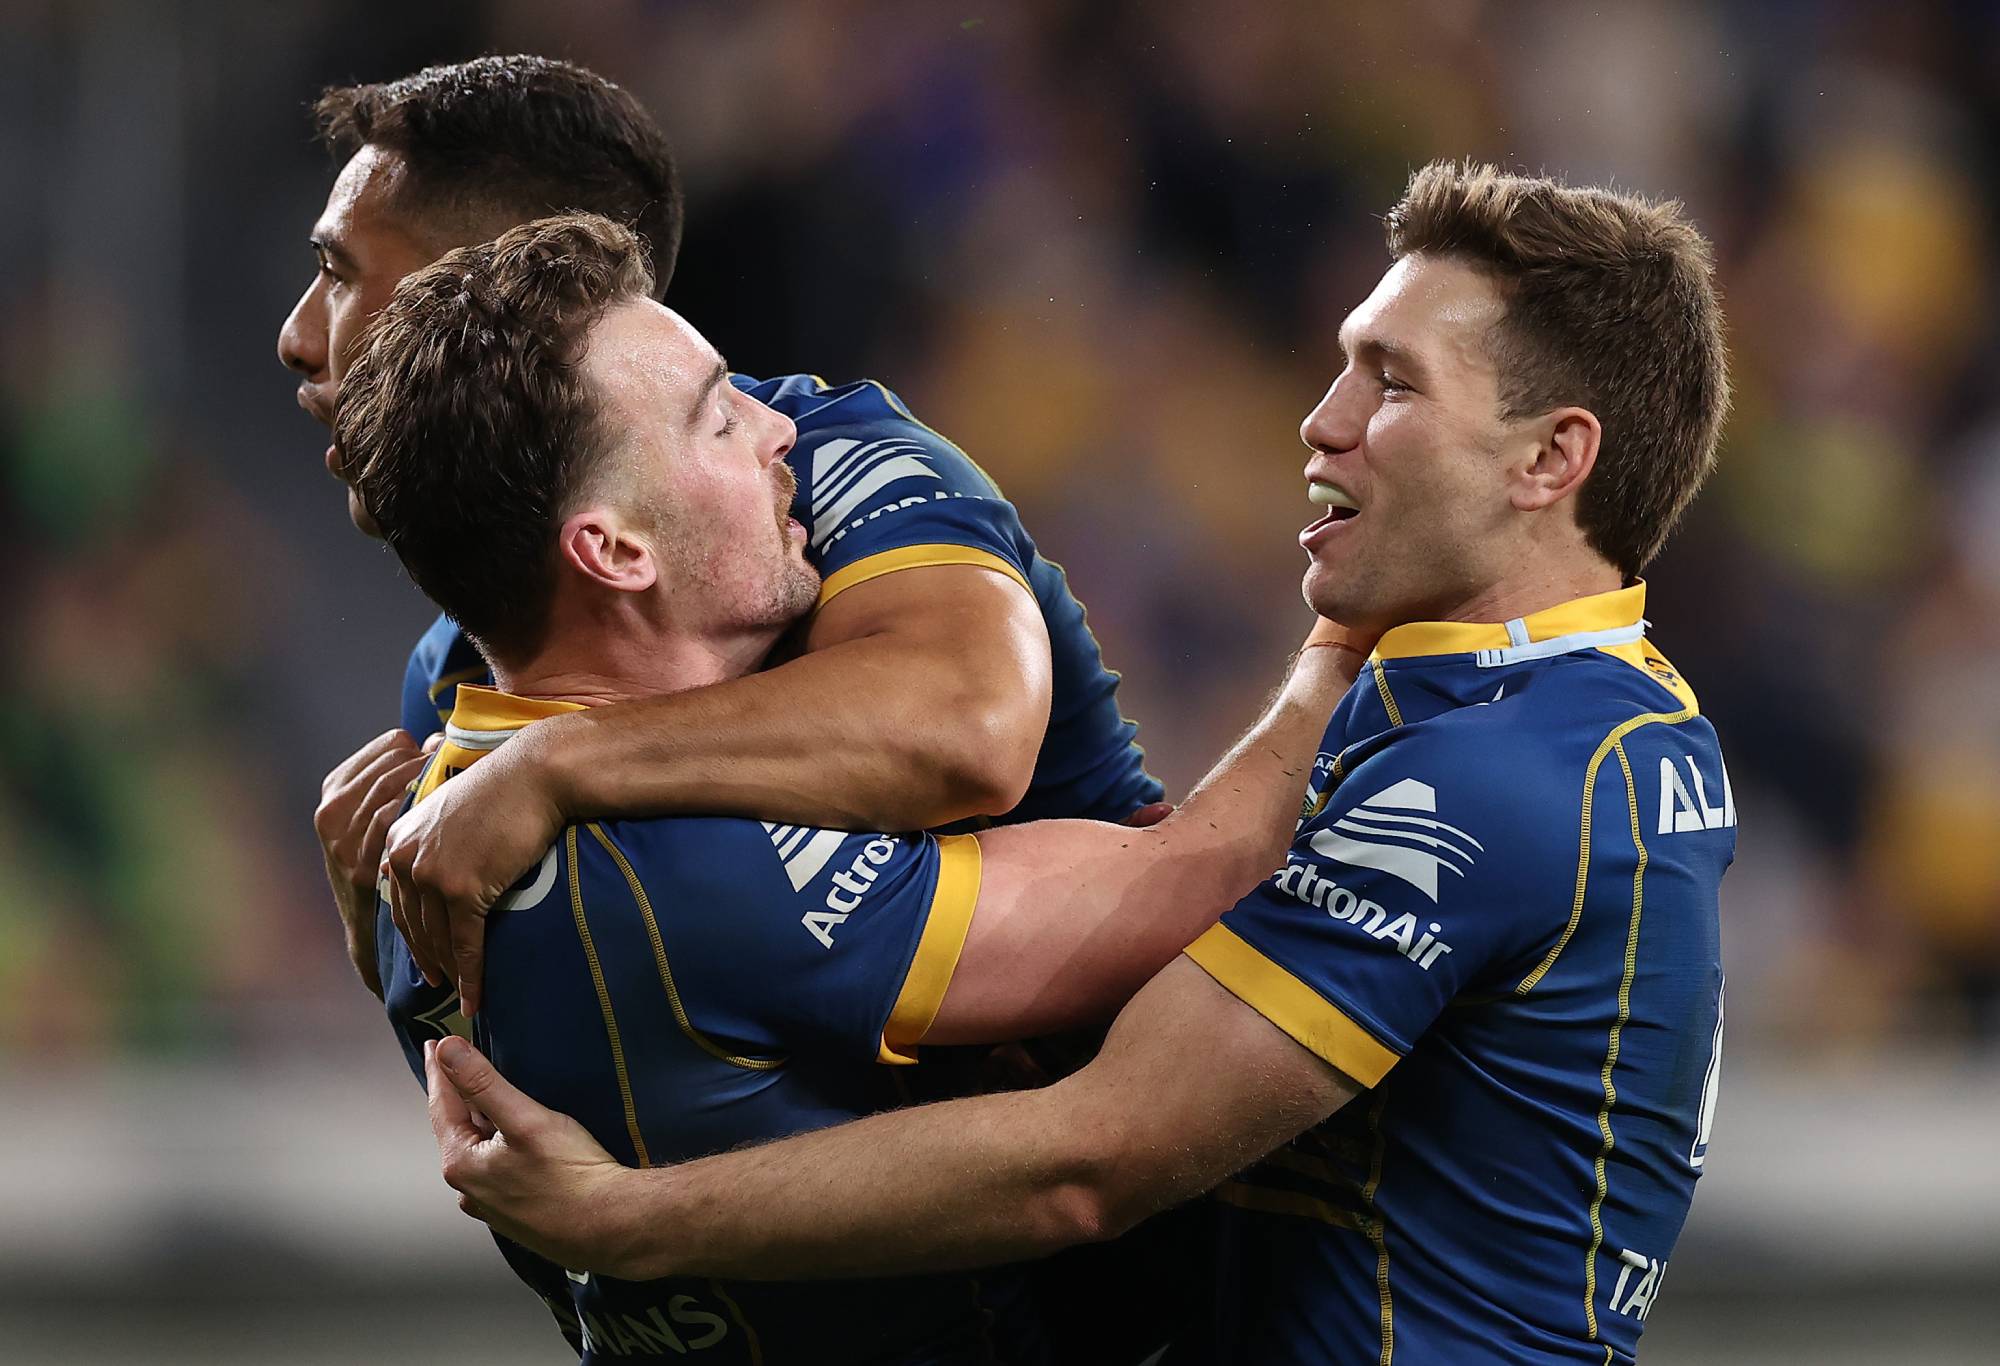 SYDNEY, AUSTRALIA - SEPTEMBER 16: Clinton Gutherson of the Eels celebrates with team mates after scoring a try, which was then disallowed by the video bunker during the NRL Semi Final match between the Parramatta Eels and the Canberra Raiders at CommBank Stadium on September 16, 2022 in Sydney, Australia. (Photo by Cameron Spencer/Getty Images)